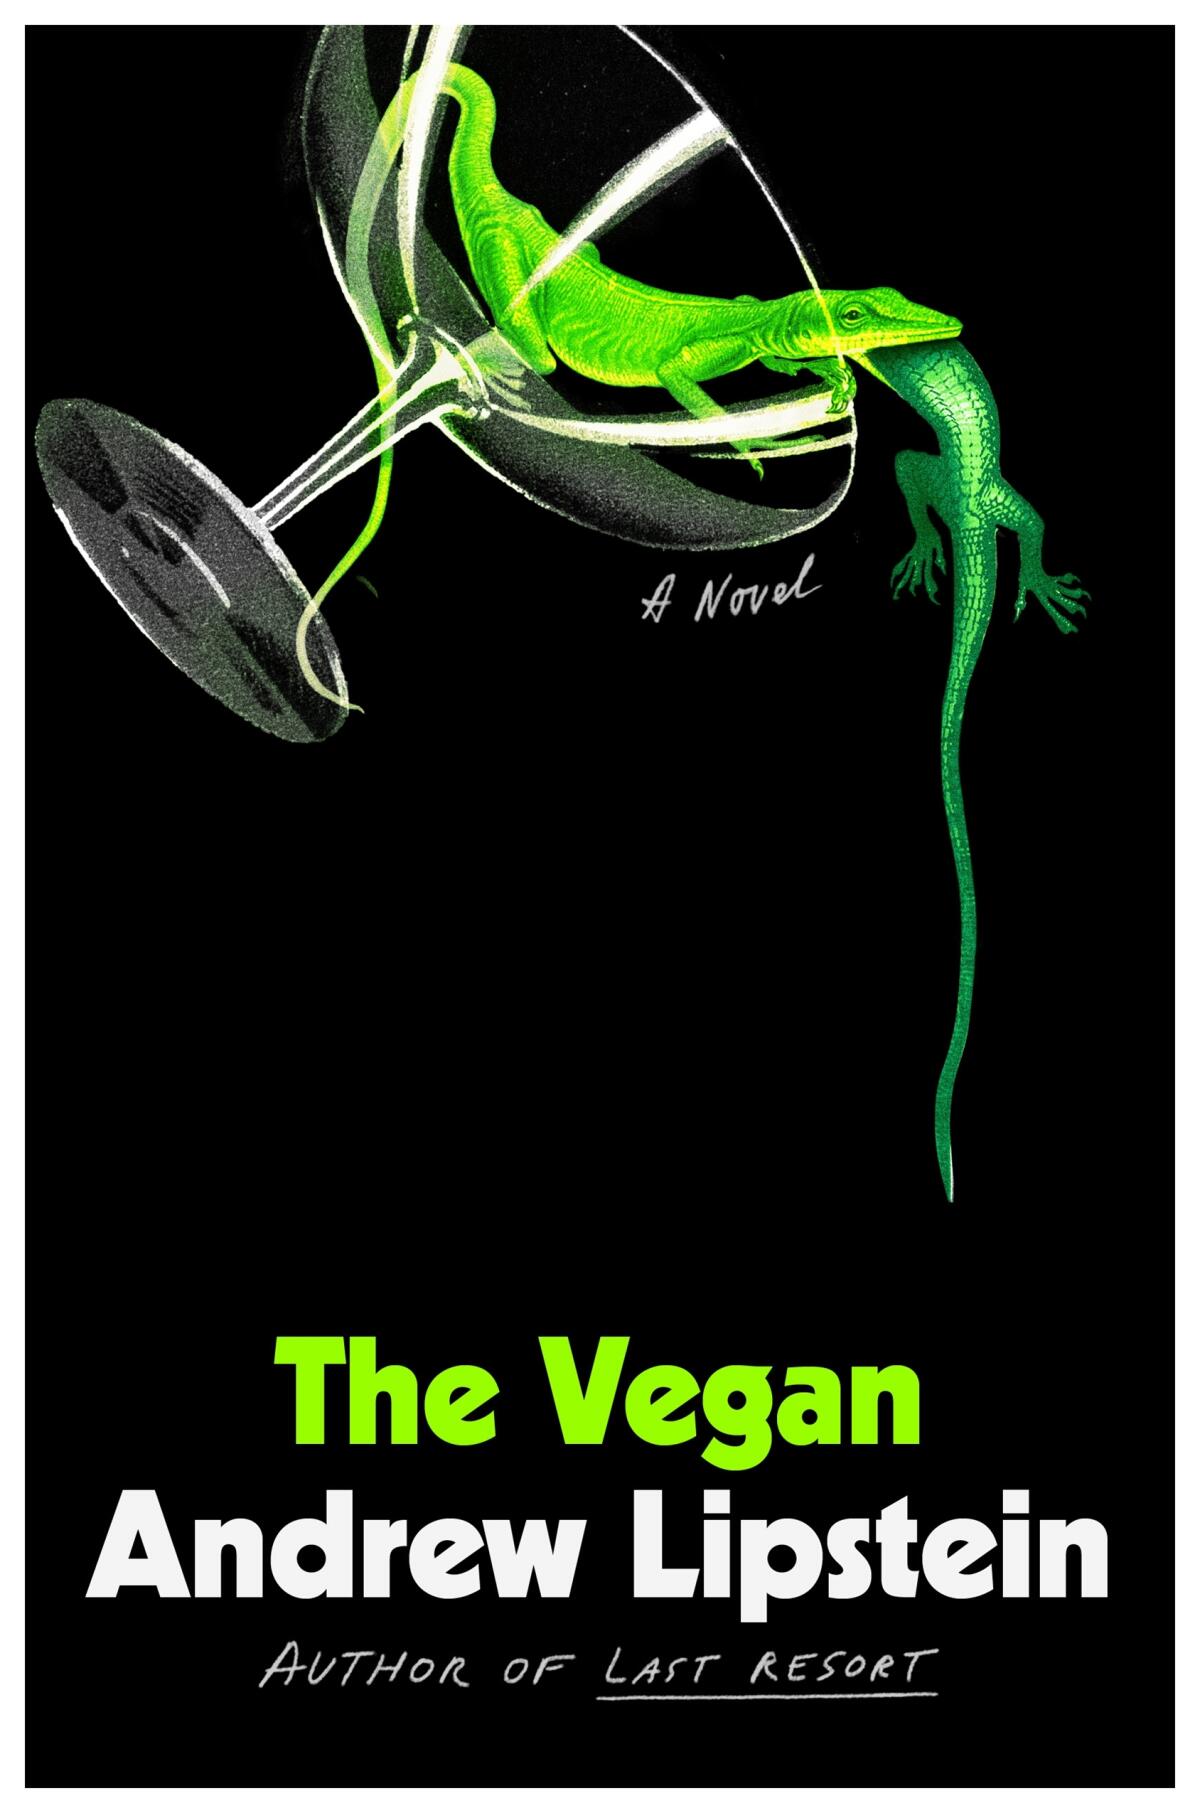 The book cover of "The Vegan" by Andrew Lipstein, featuring a lizard in an empty cup eating another lizard.